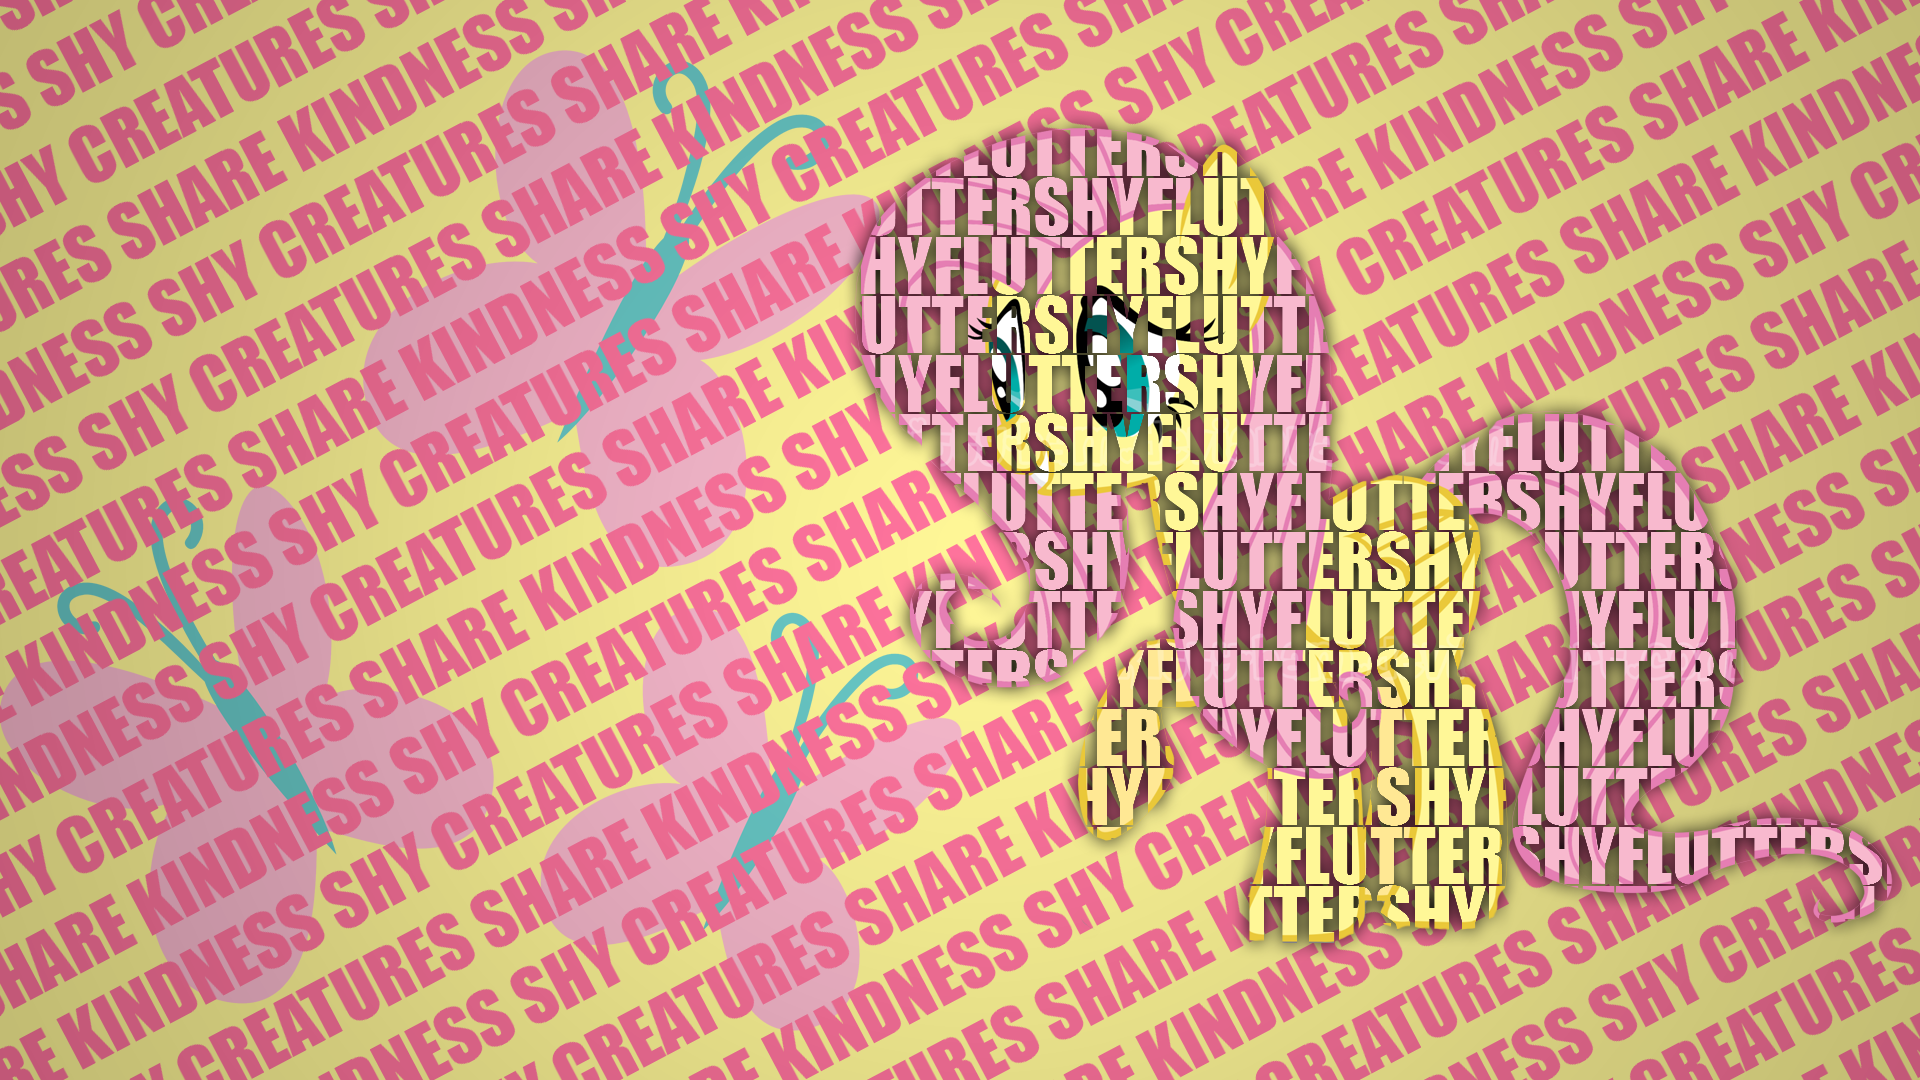 Fluttershy Typography Wallpaper [1920x1080] by CoRnFlAkEs369